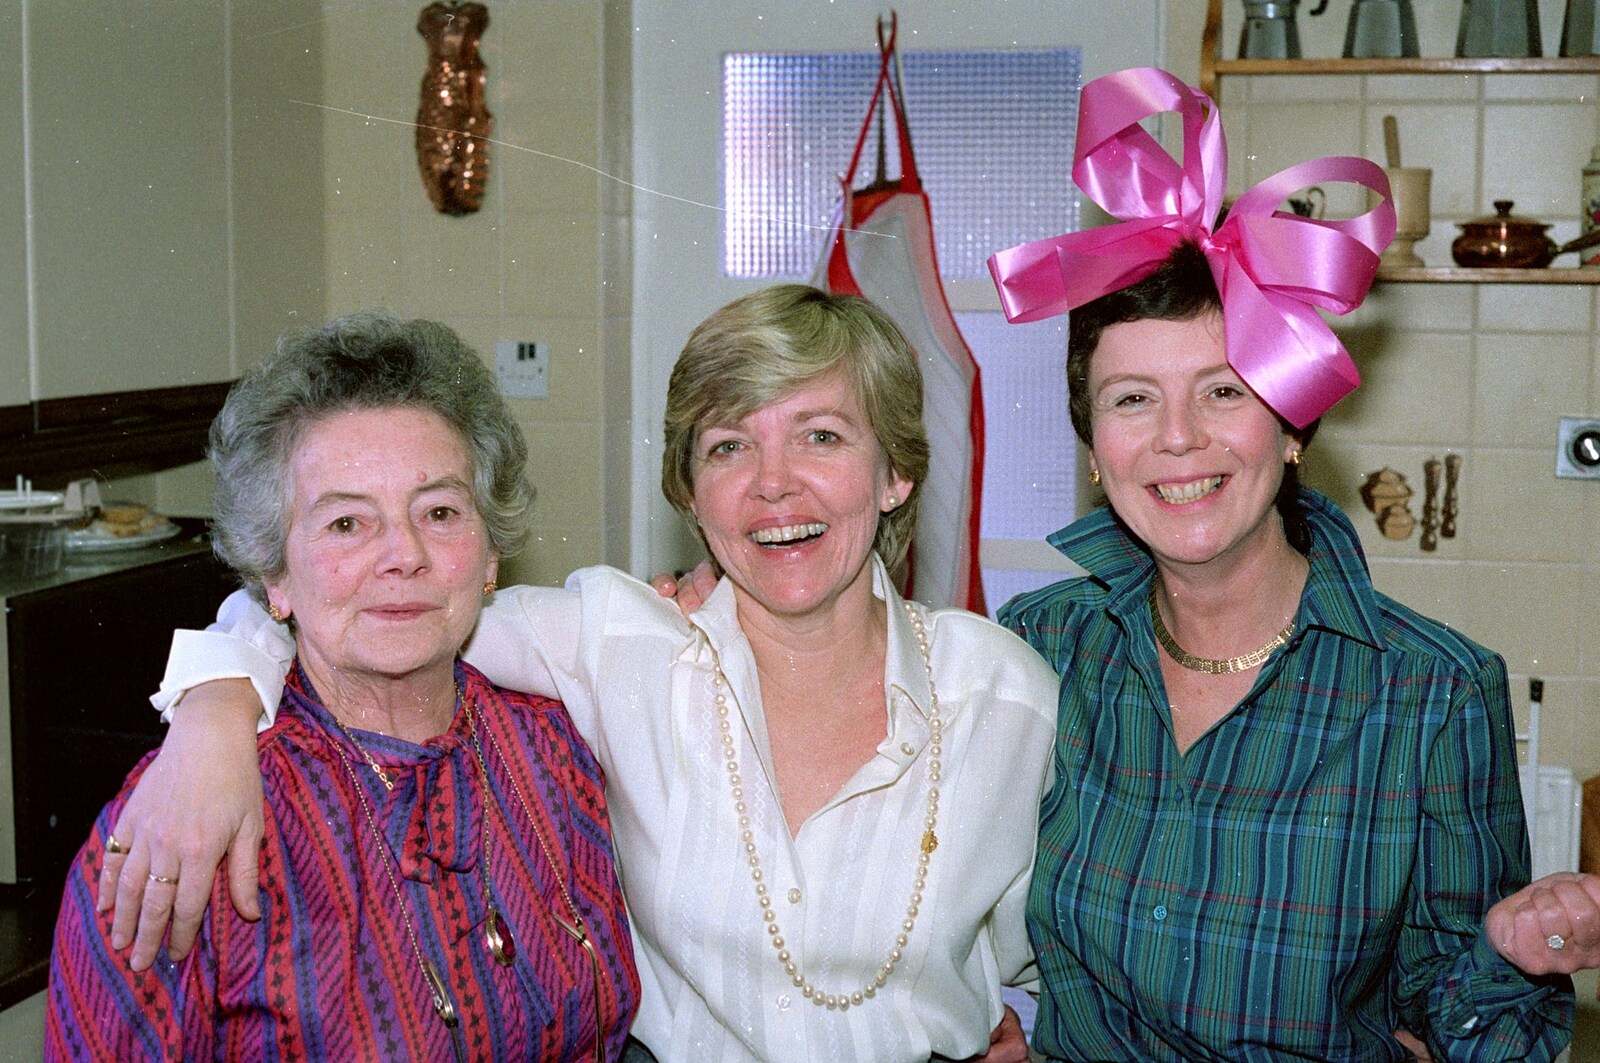 Judith (right) and her family from Hamish's 21st and Christmas, New Milton and Bransgore - 25th December 1987